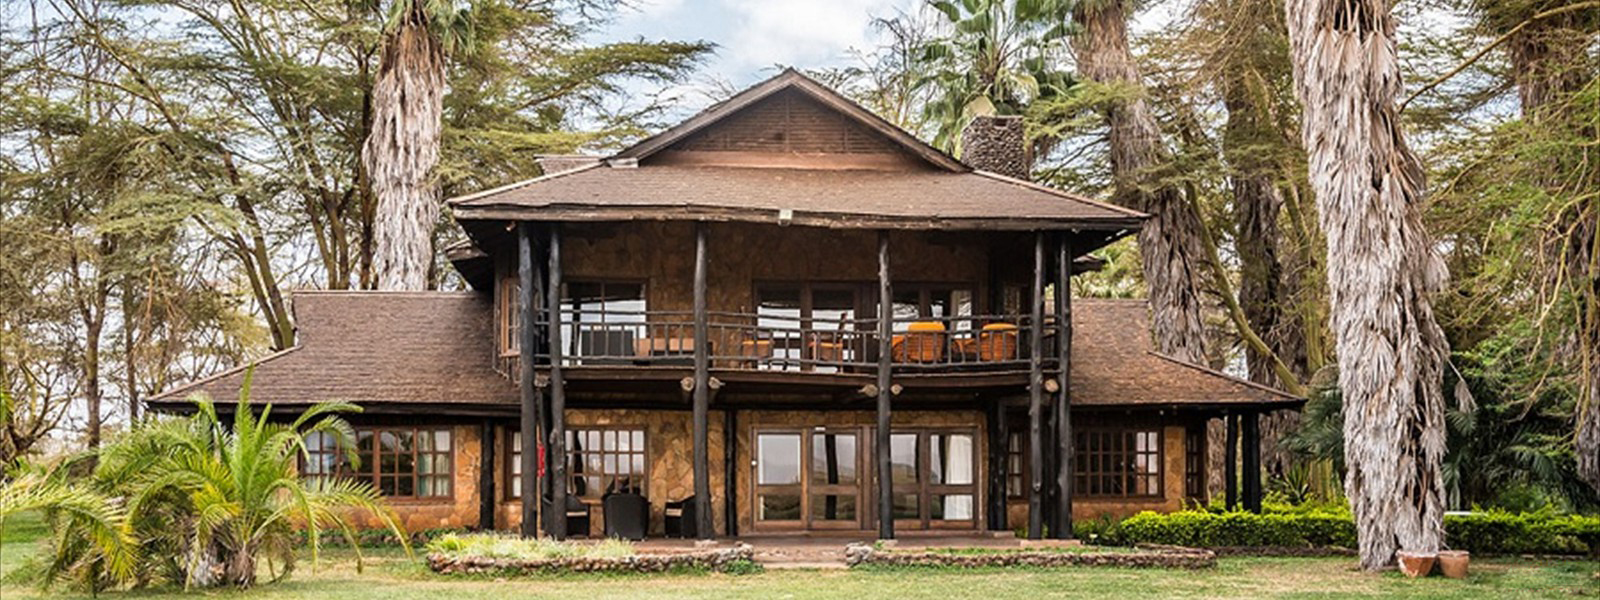 TOURIST ACTIVITIES IN AMBOSELI NATIONAL PARK, TOURIST ATTRACTIONS IN AMBOSELI NATIONAL PARK, ACTIVITIES, POPULAR LODGES, MOST FAMOUS, TENTED CAMPS, WHERE TO STAY, AMBOSELI SERENA, KIBO VILLA, AMBOSELI TAWI LODGE, AMBOSELI SOPA LODGE, KIBO SAFARI CAMP AMBOSELI